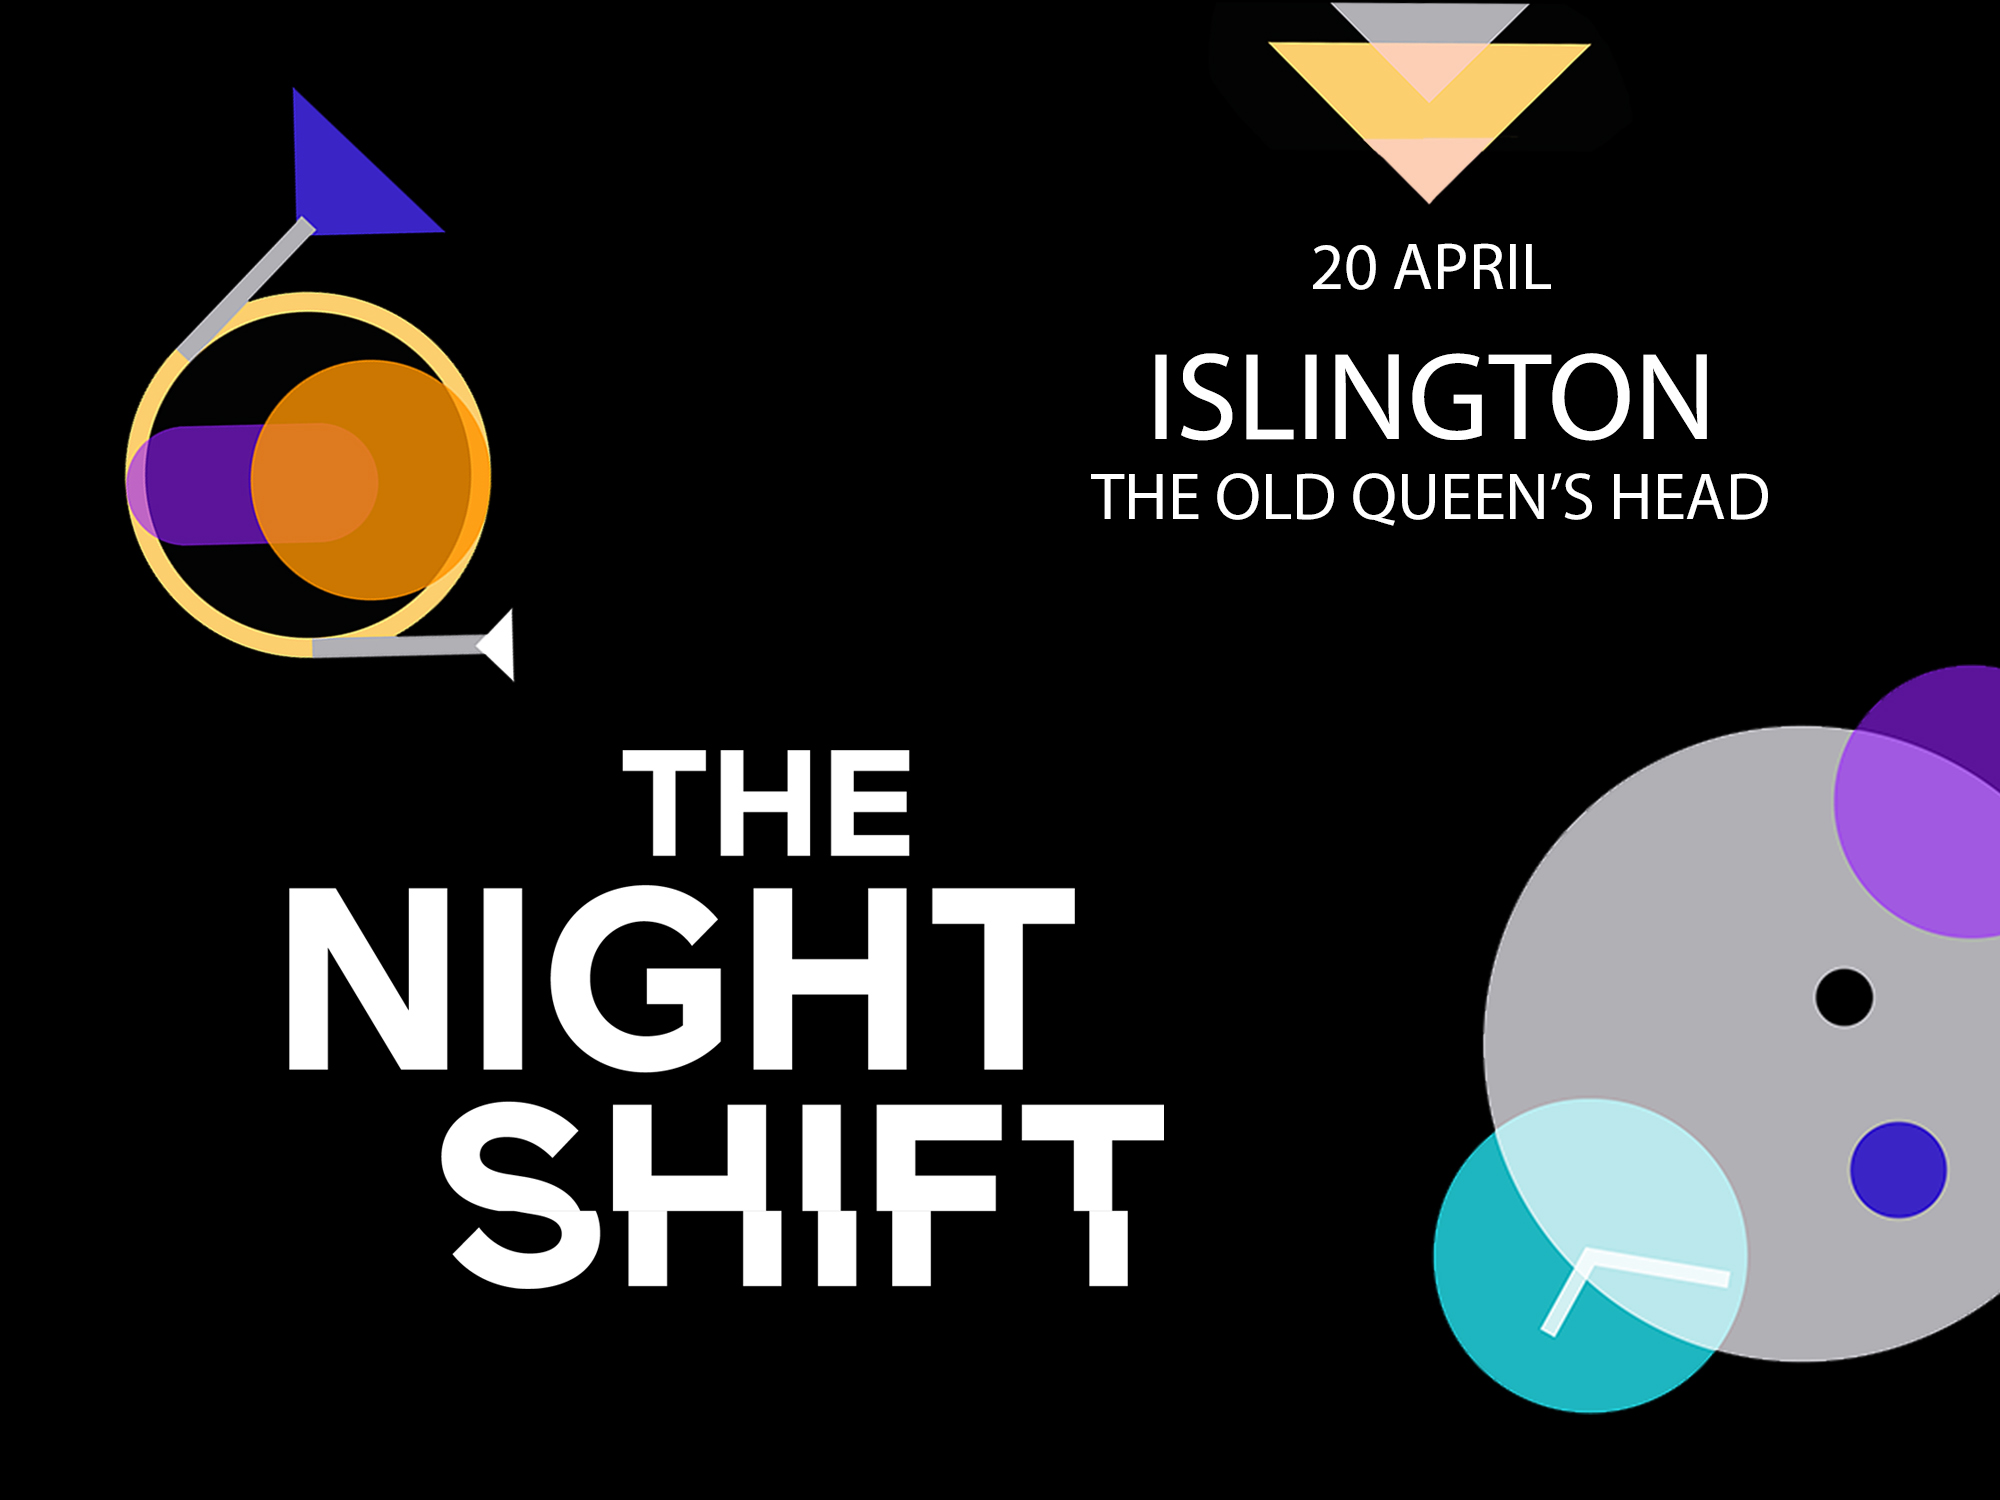 The Night Shift: Whole Season 2021/22 - Orchestra of the Age of  Enlightenment